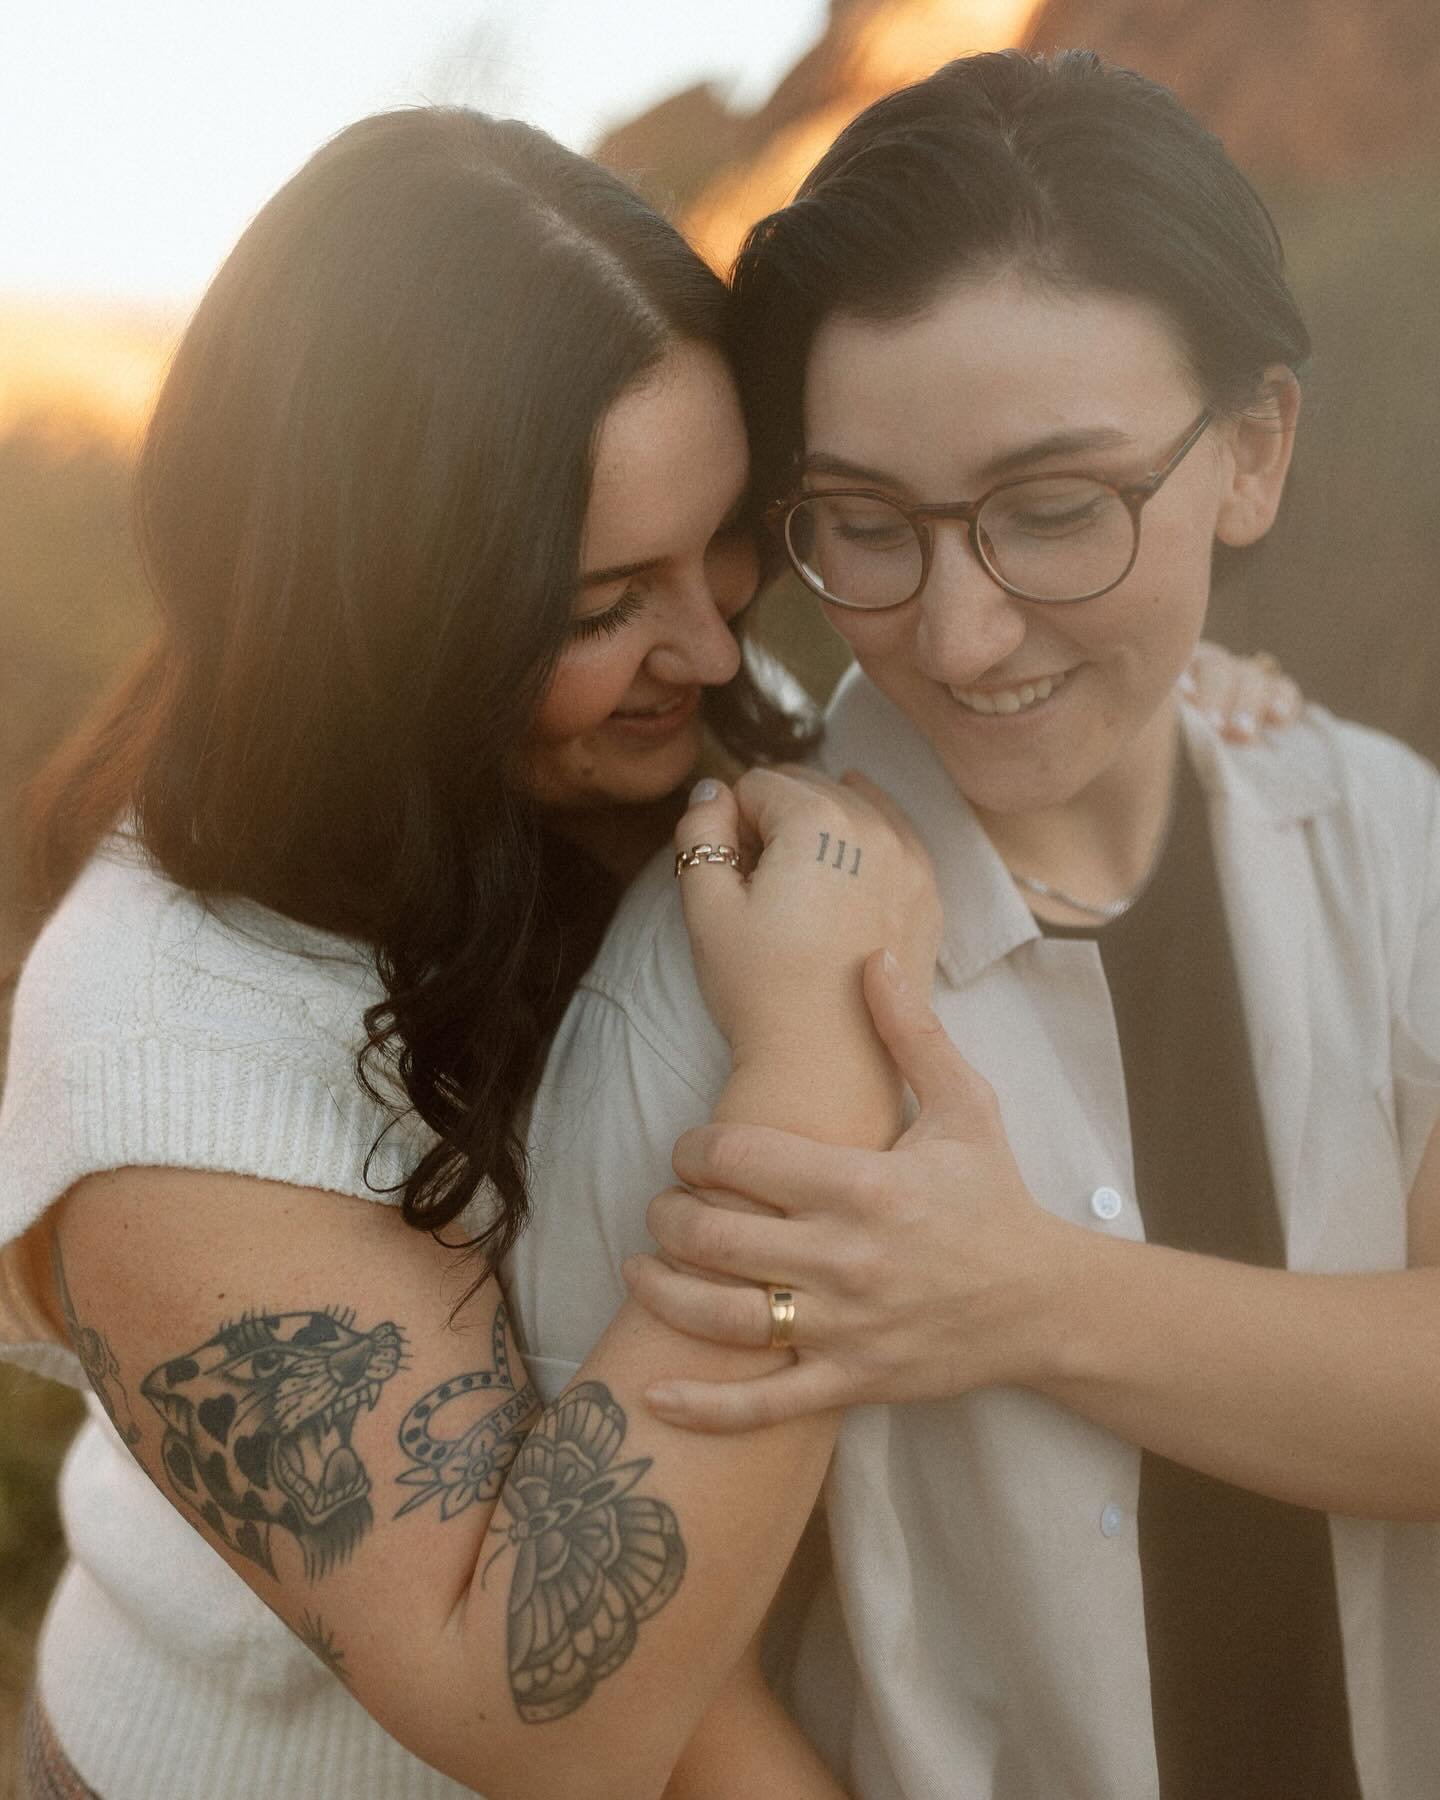 Summer and Laken in the summer, setting my heart on fire! These photos fuel my queer joy! I can&rsquo;t wait for their elopement 🥹